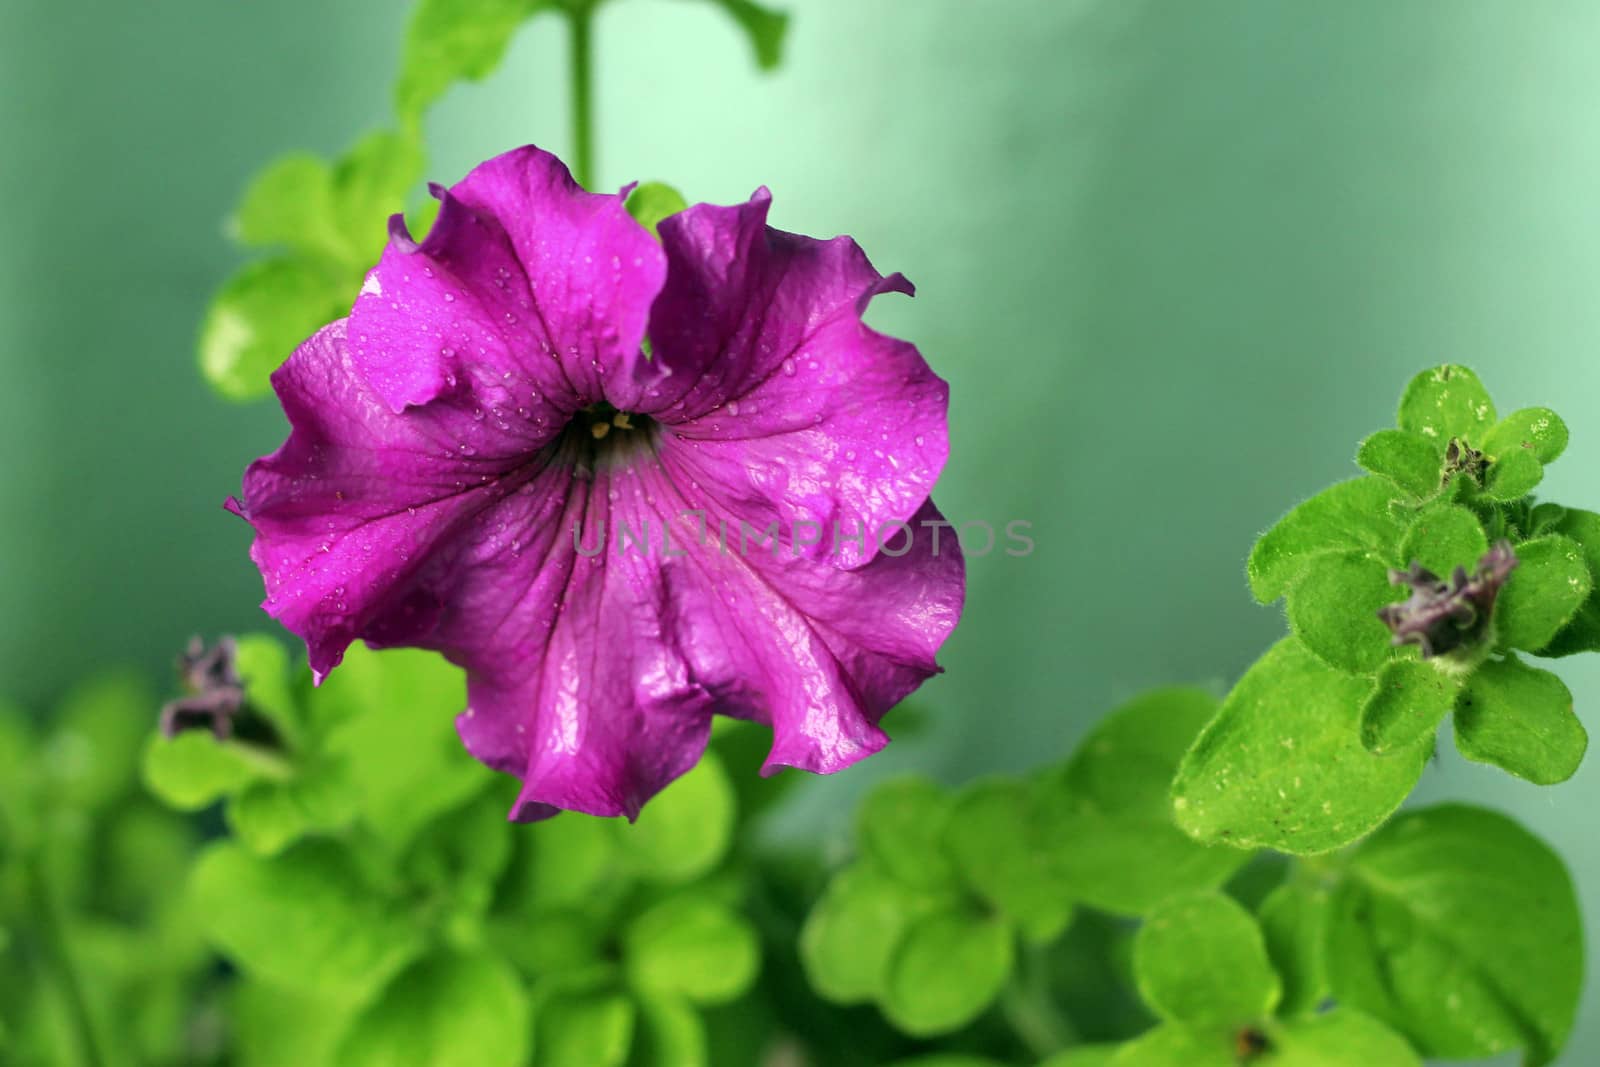 Violet petunia blooming under drops and green leaves by scullery